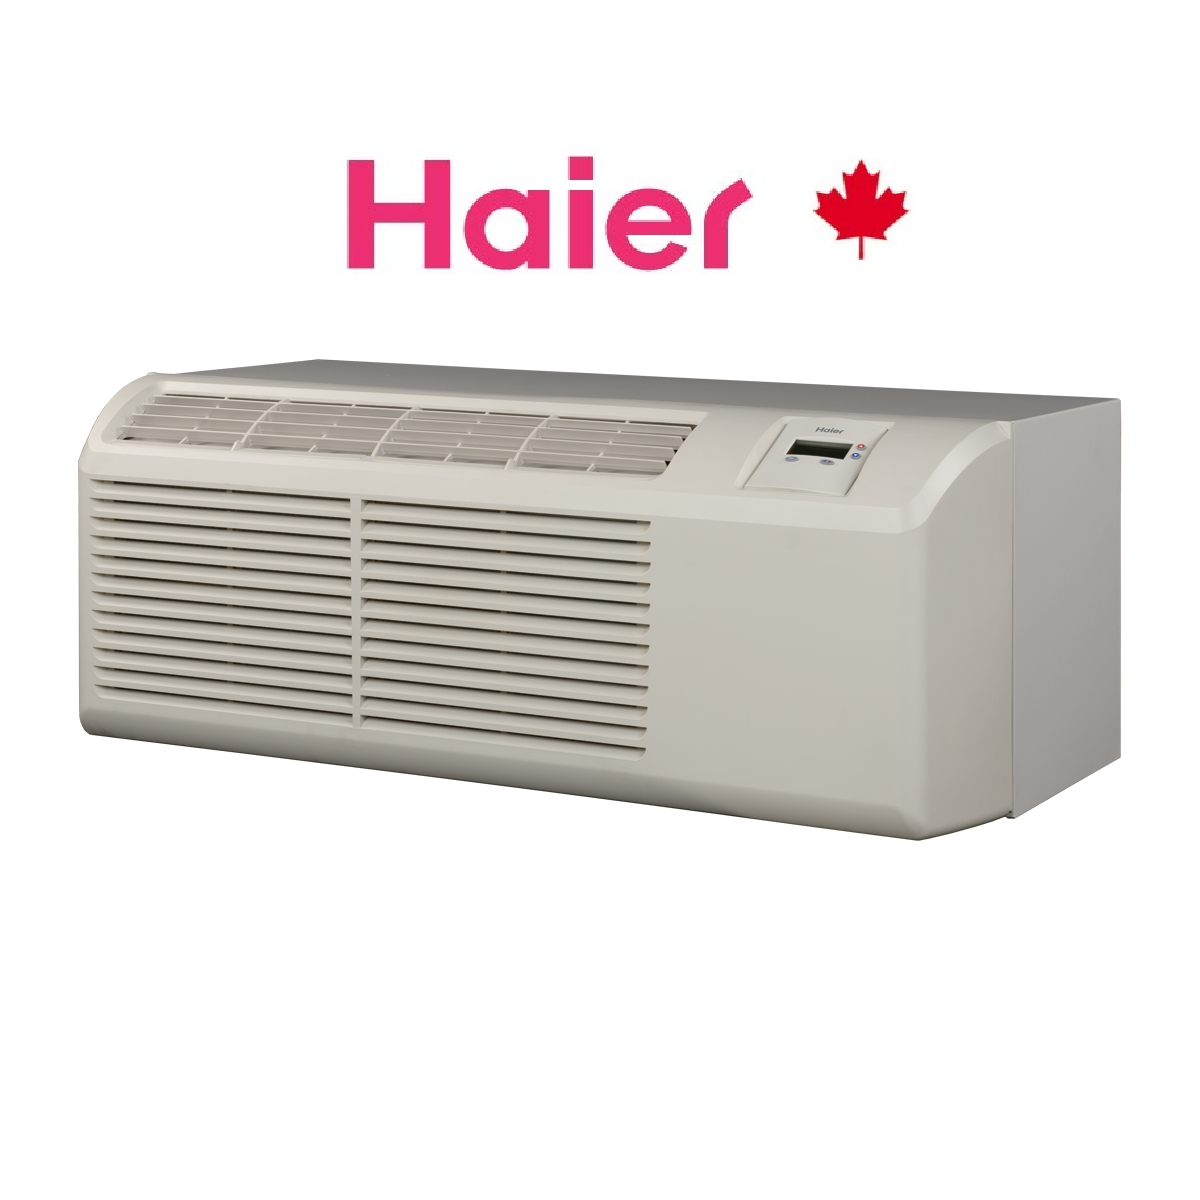 HAIER PTAC UNITS PTHH1201UAC HEAT PUMPCOOLING AND HEATING